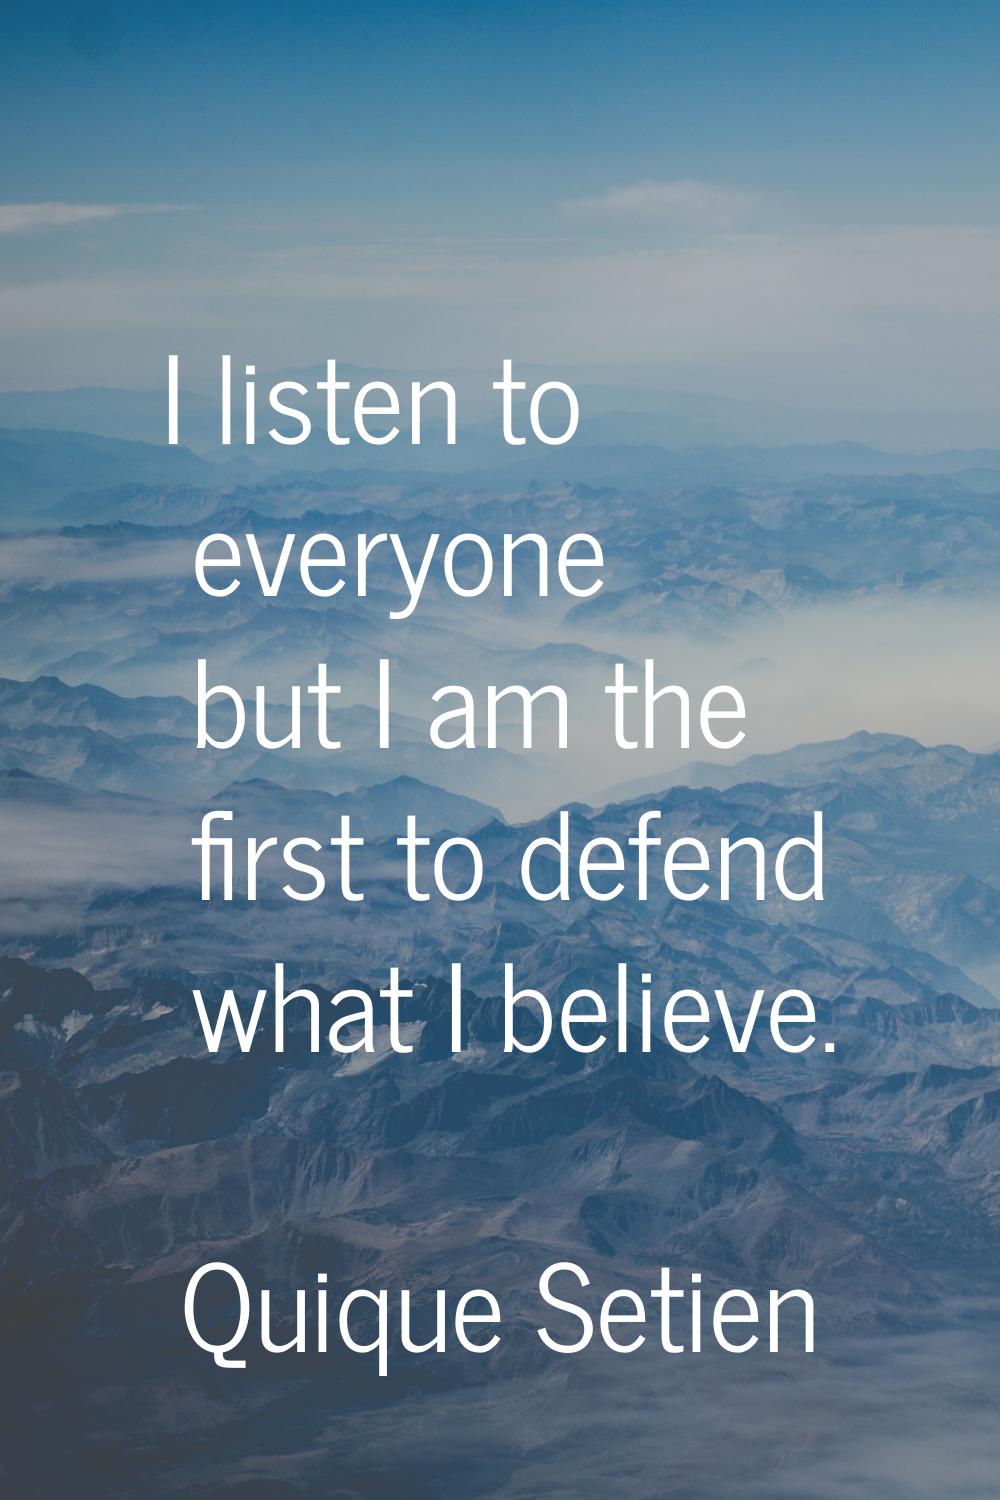 I listen to everyone but I am the first to defend what I believe.